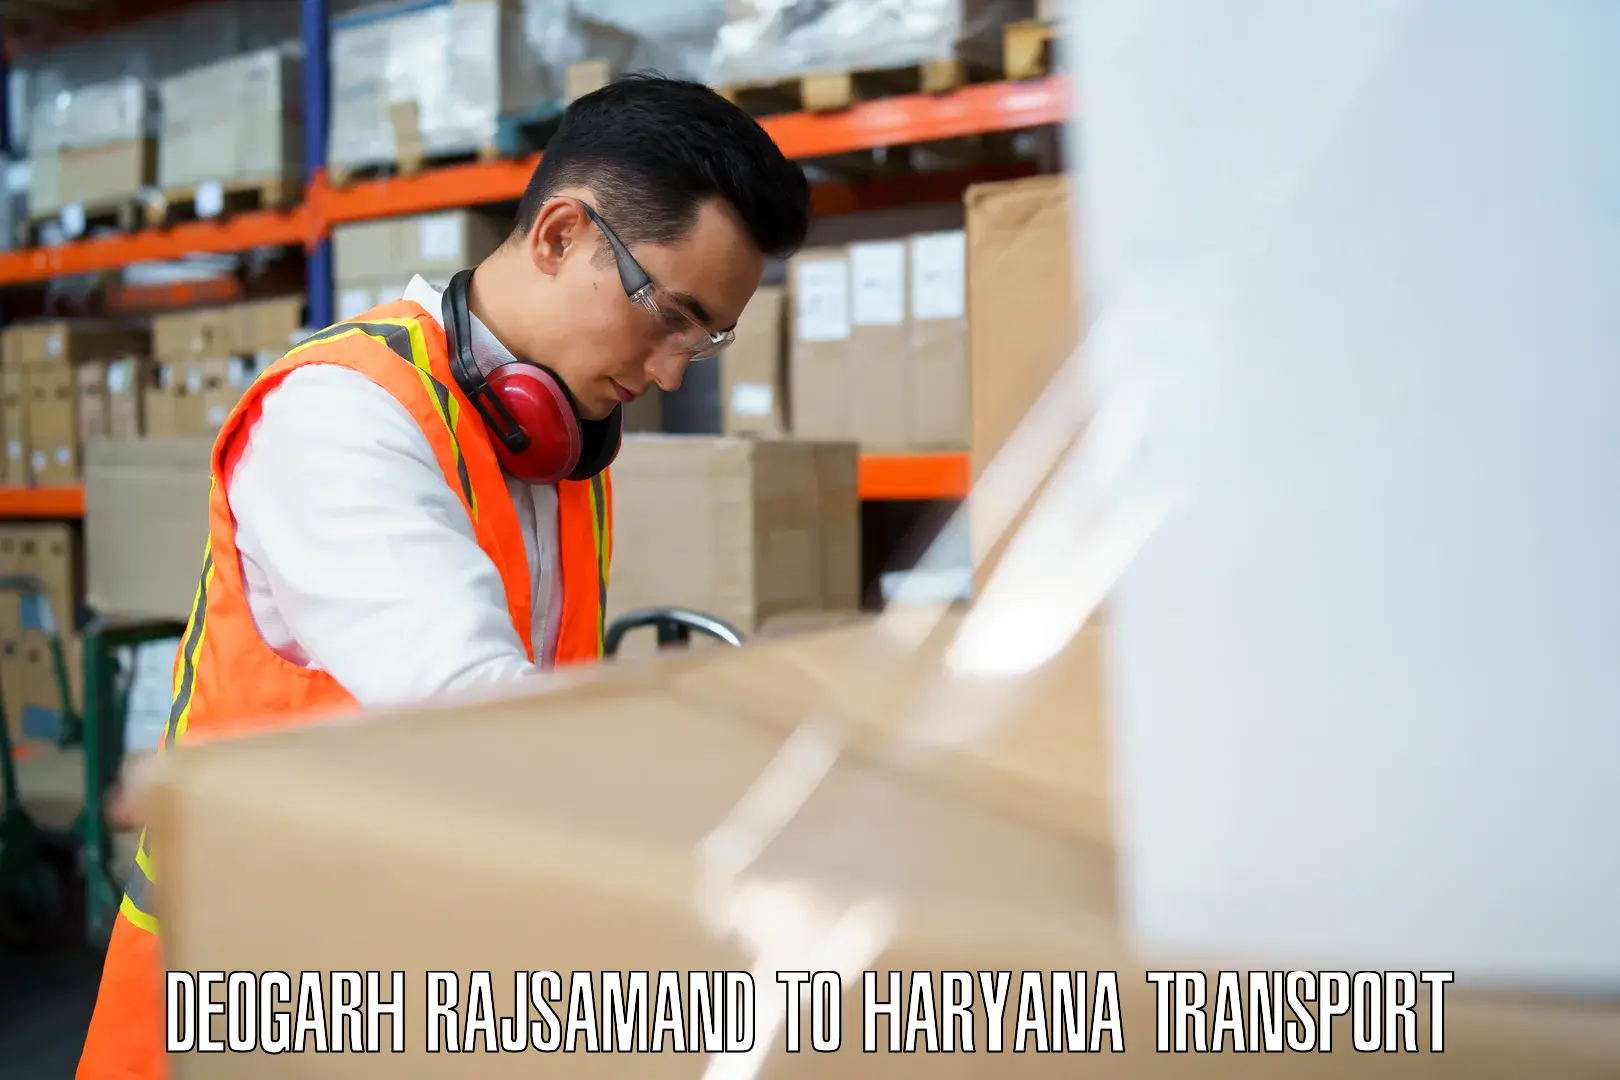 Air freight transport services in Deogarh Rajsamand to Gurgaon